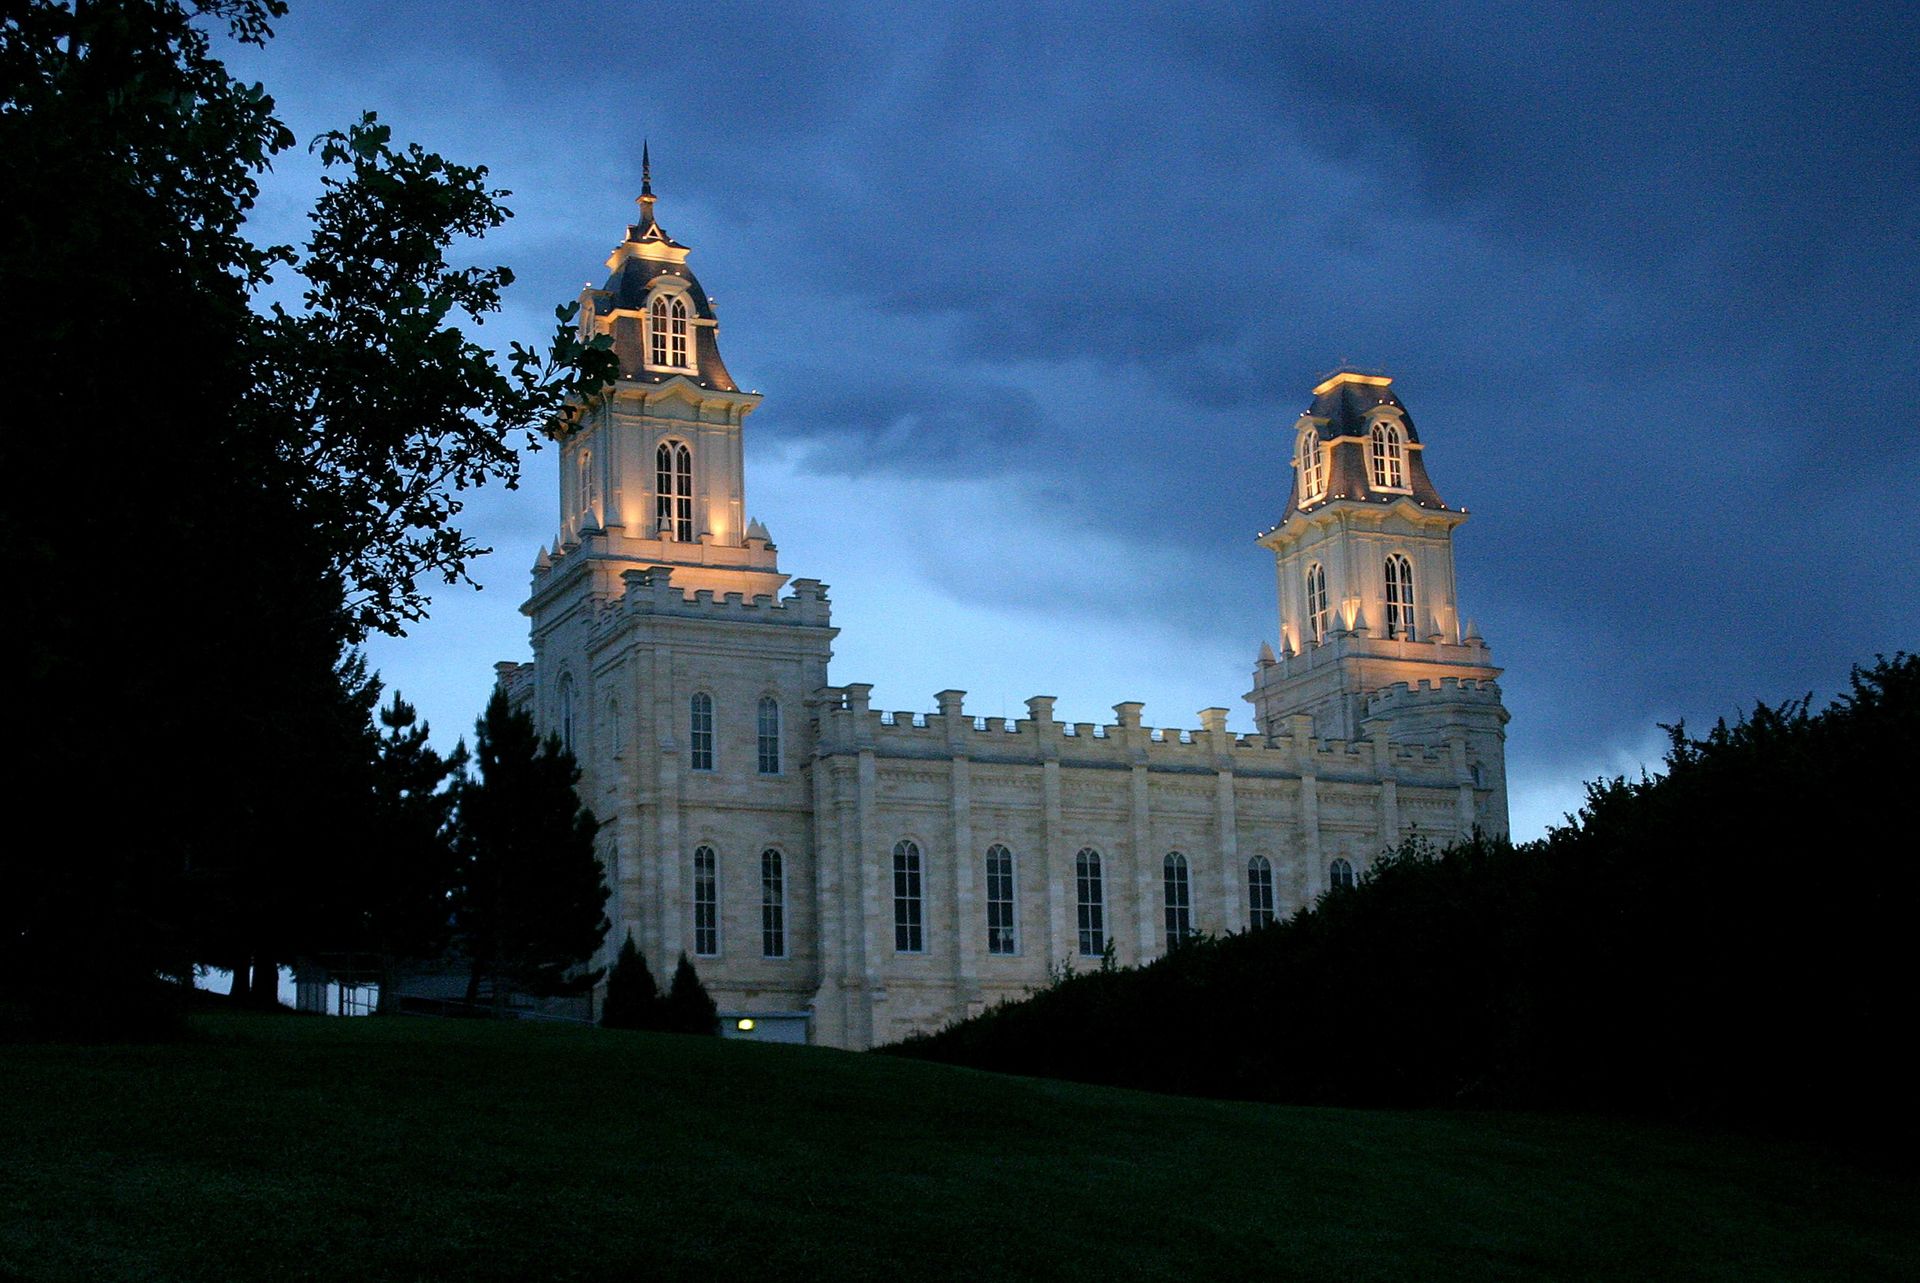 The Manti Utah Temple in the evening, including scenery.